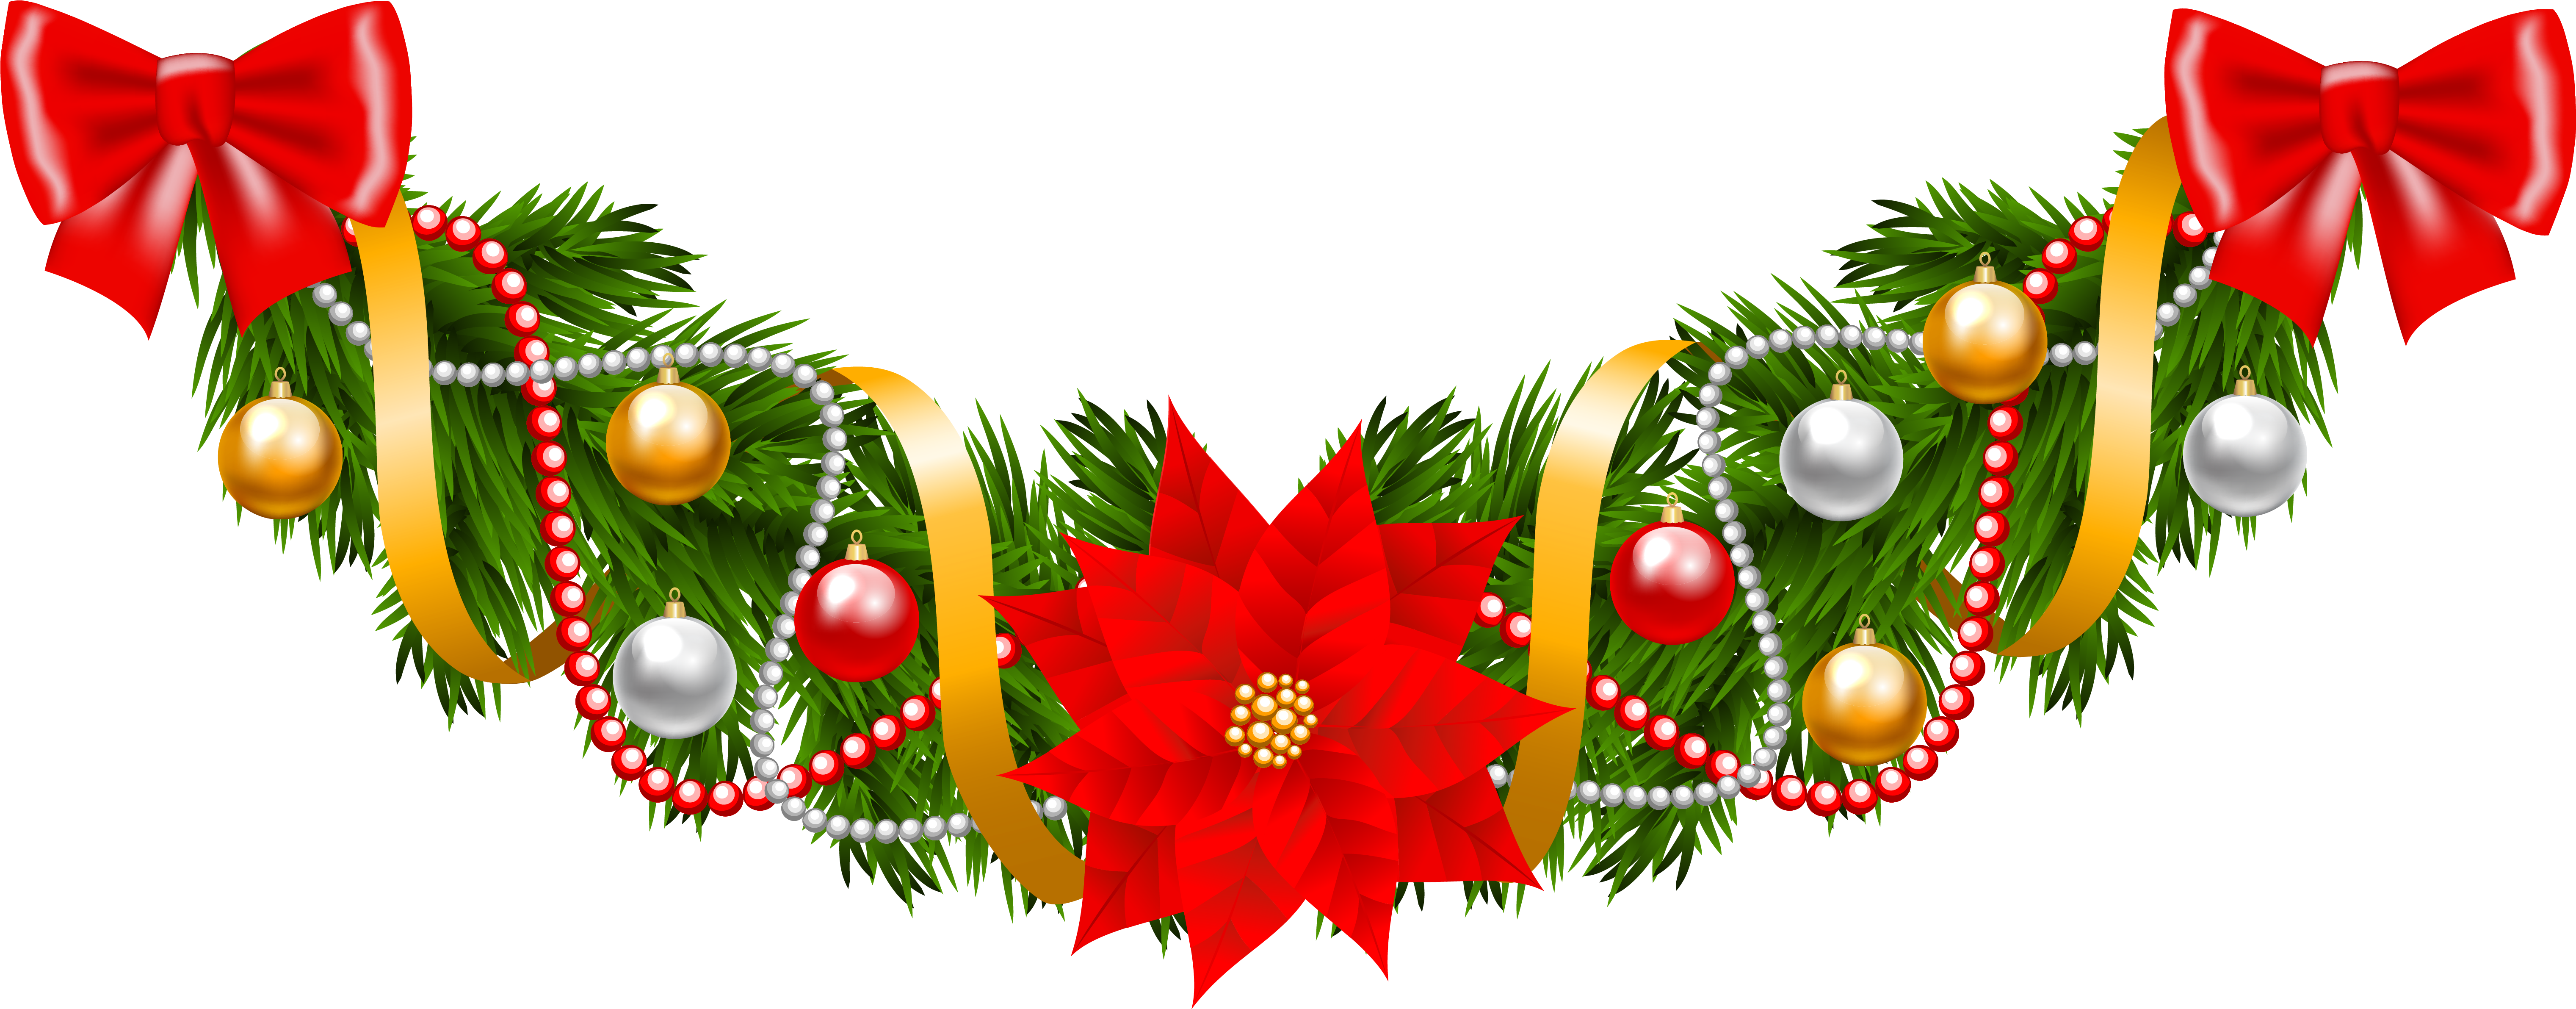 Download Garland Clipart Of Christmas Wreaths Image Clip Art 